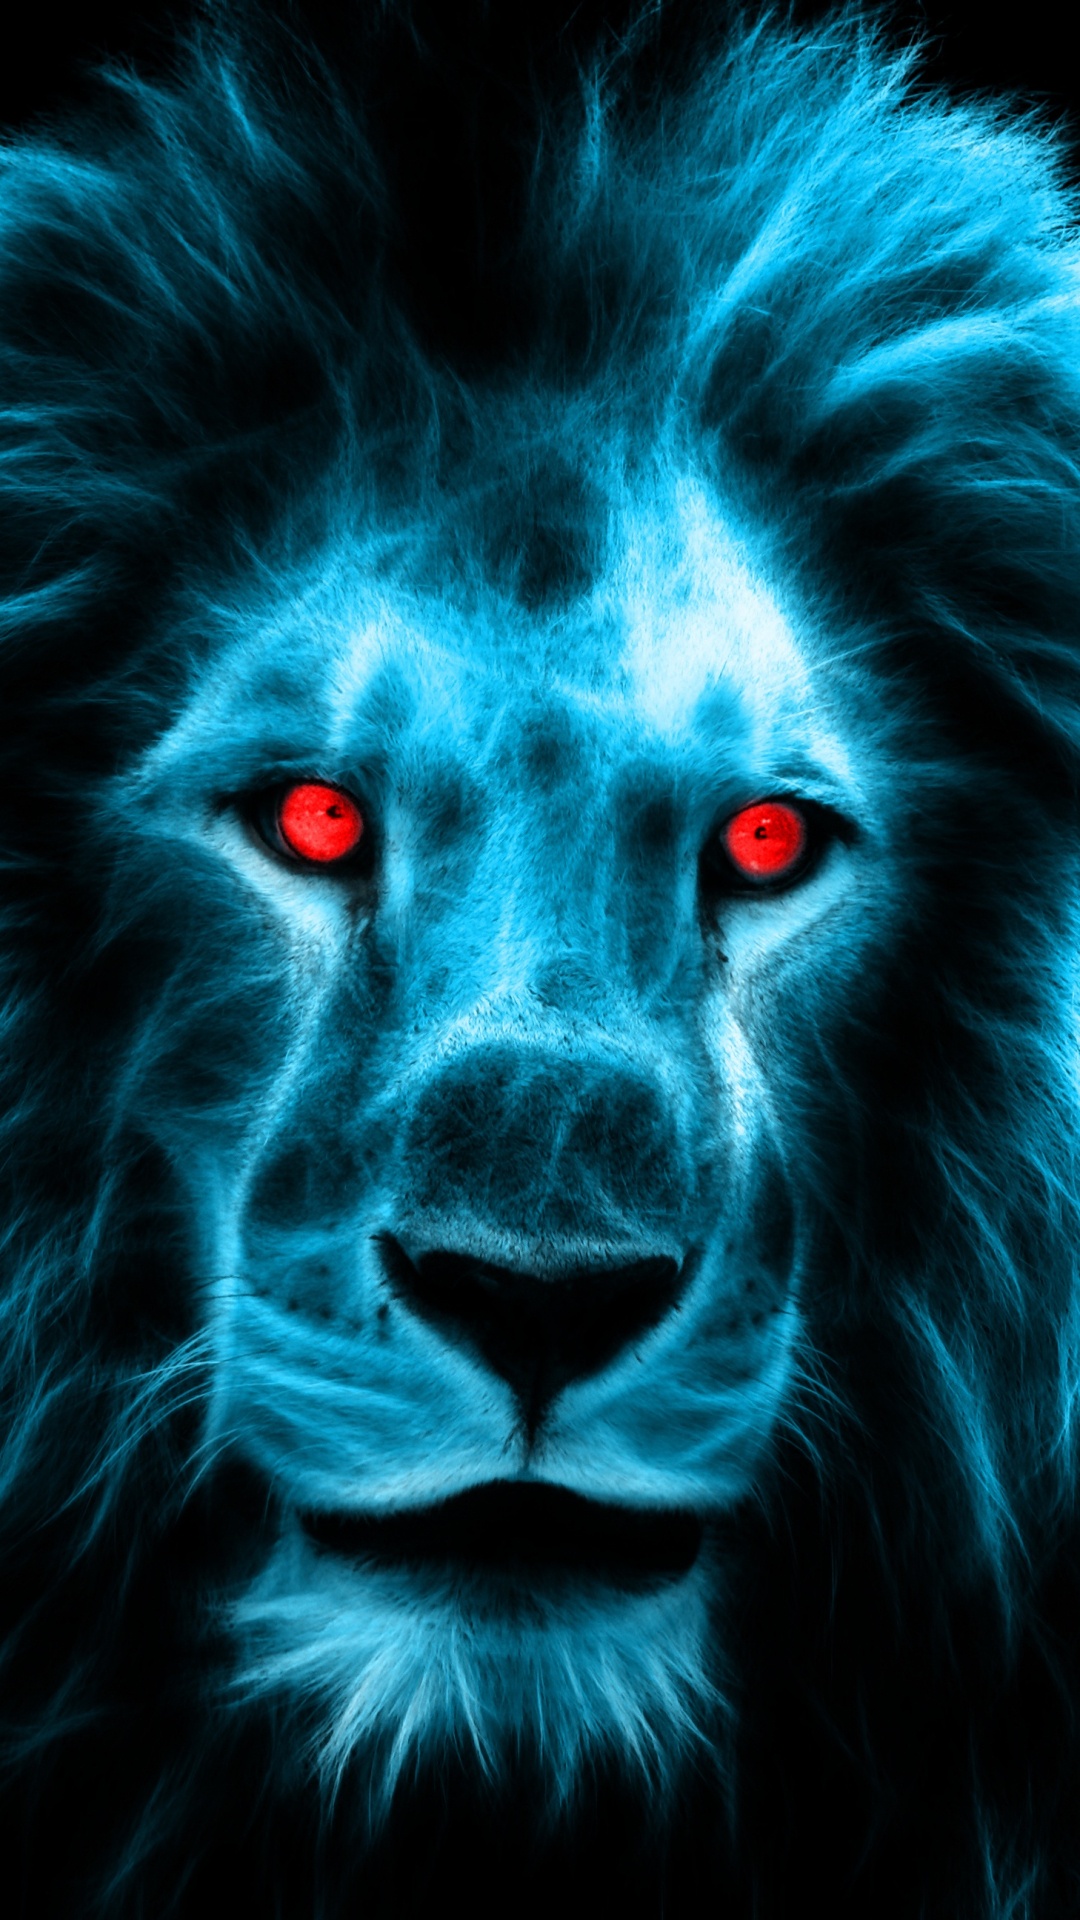 Lion With Blue Eyes Illustration. Wallpaper in 1080x1920 Resolution